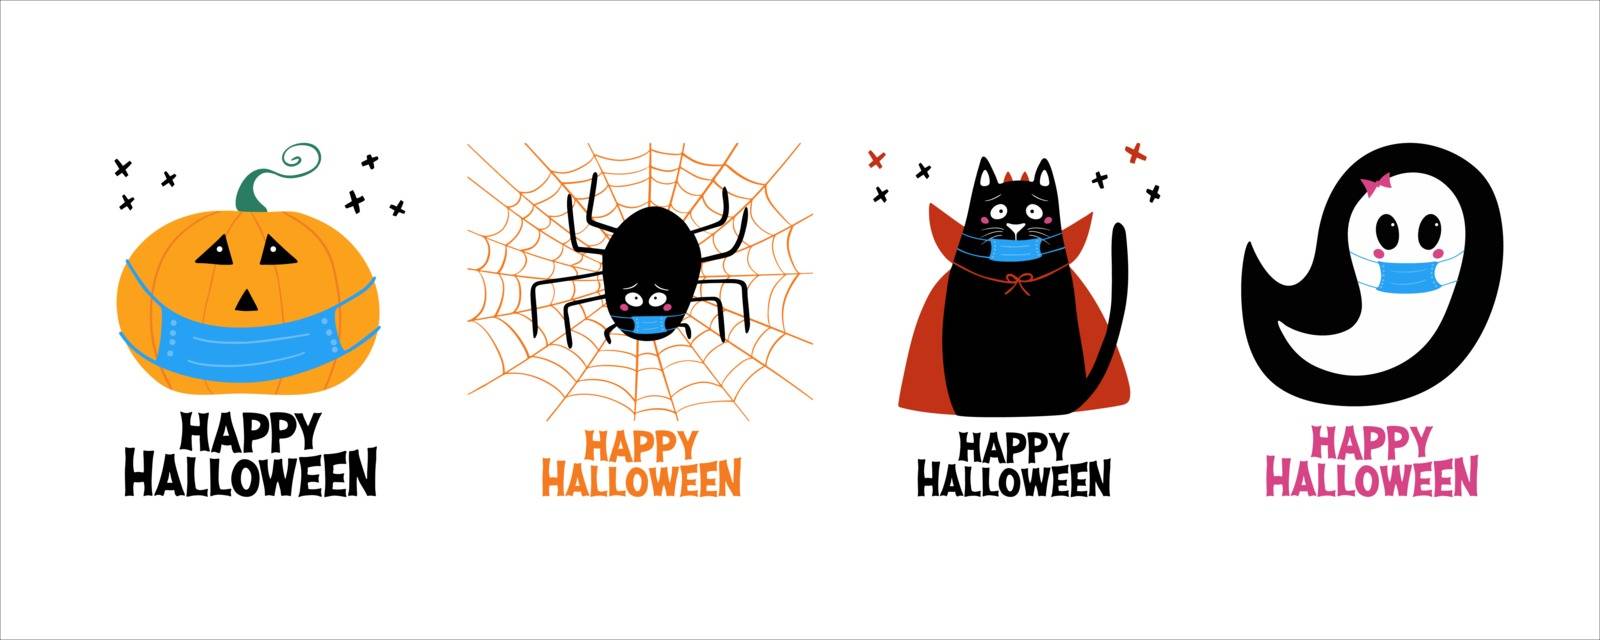 Quarantine Halloween greeting cards set. Jack o lantern, ghost, cat, spider in medical face mask. Isolated on white background. Vector stock illustration. by anna_artist